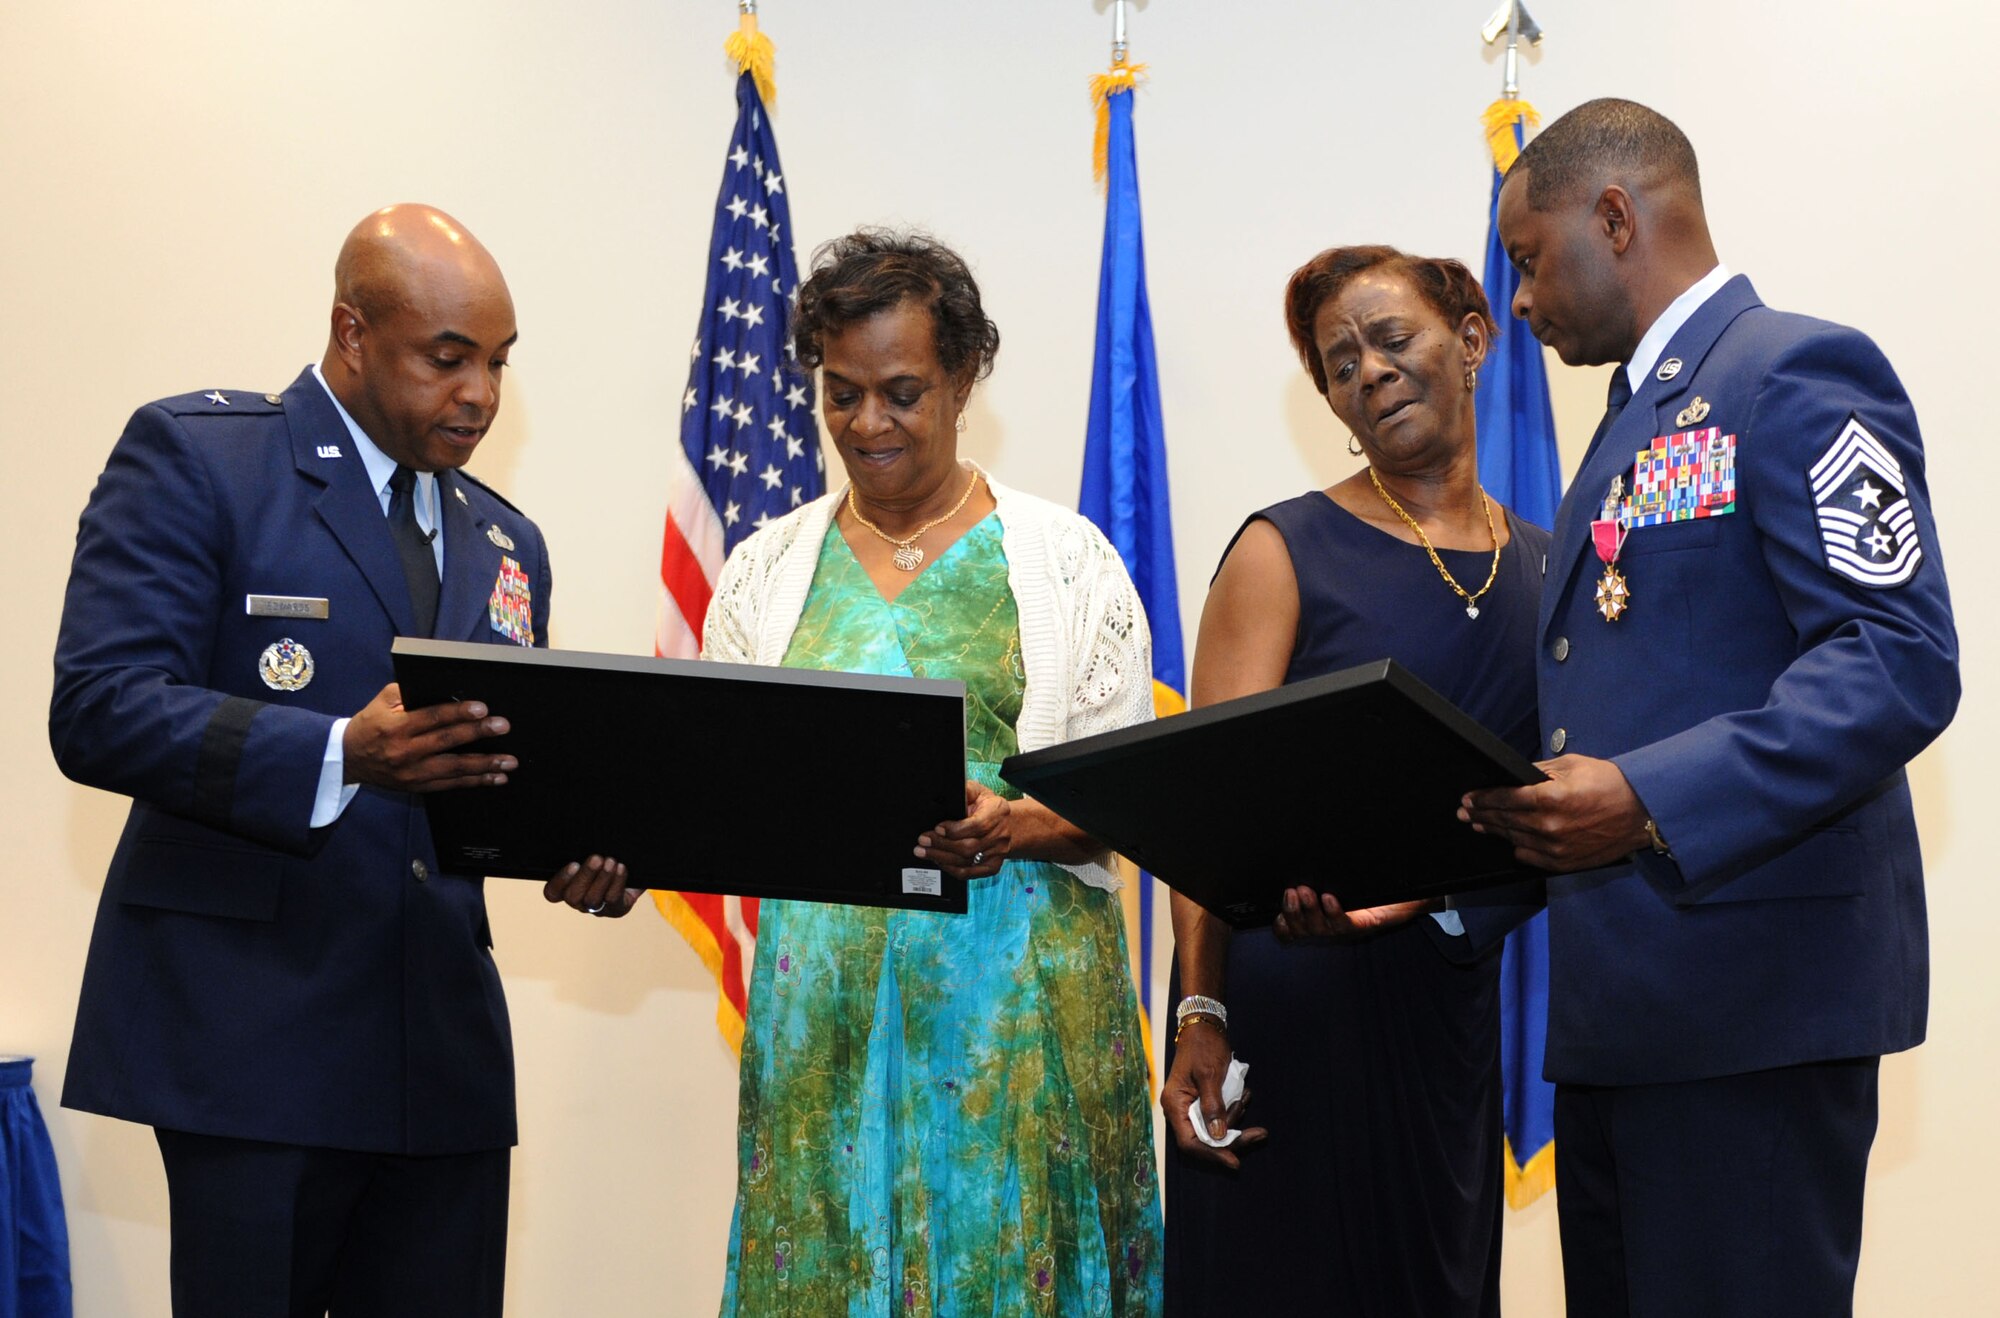 Brig. Gen. Trent Edwards, Headquarters Air Force Space Command financial management and comptroller director, Peterson Air Force Base, Colo., and Chief Master Sgt. Harry Hutchinson, 81st Training Wing command chief, present Evon Foxworth, Hutchinson’s mother, and his aunt, Veradelle Halback, with gifts during his retirement ceremony at the Roberts Consolidated Aircraft Maintenance Facility Aug. 19, 2016, on Keesler AFB, Miss. Hutchinson retired with more than 29 years of military service. He served multiple assignments in Washington, Korea, Maryland, Japan, Nevada, South Dakota and Africa. He also worked as the superintendent of the U.S. Army’s RED HORSE sites in Iraq and Afghanistan and the Air Force’s 732nd Expeditionary Prime BEEF squadron. (U.S. Air Force photo by Kemberly Groue/Released)